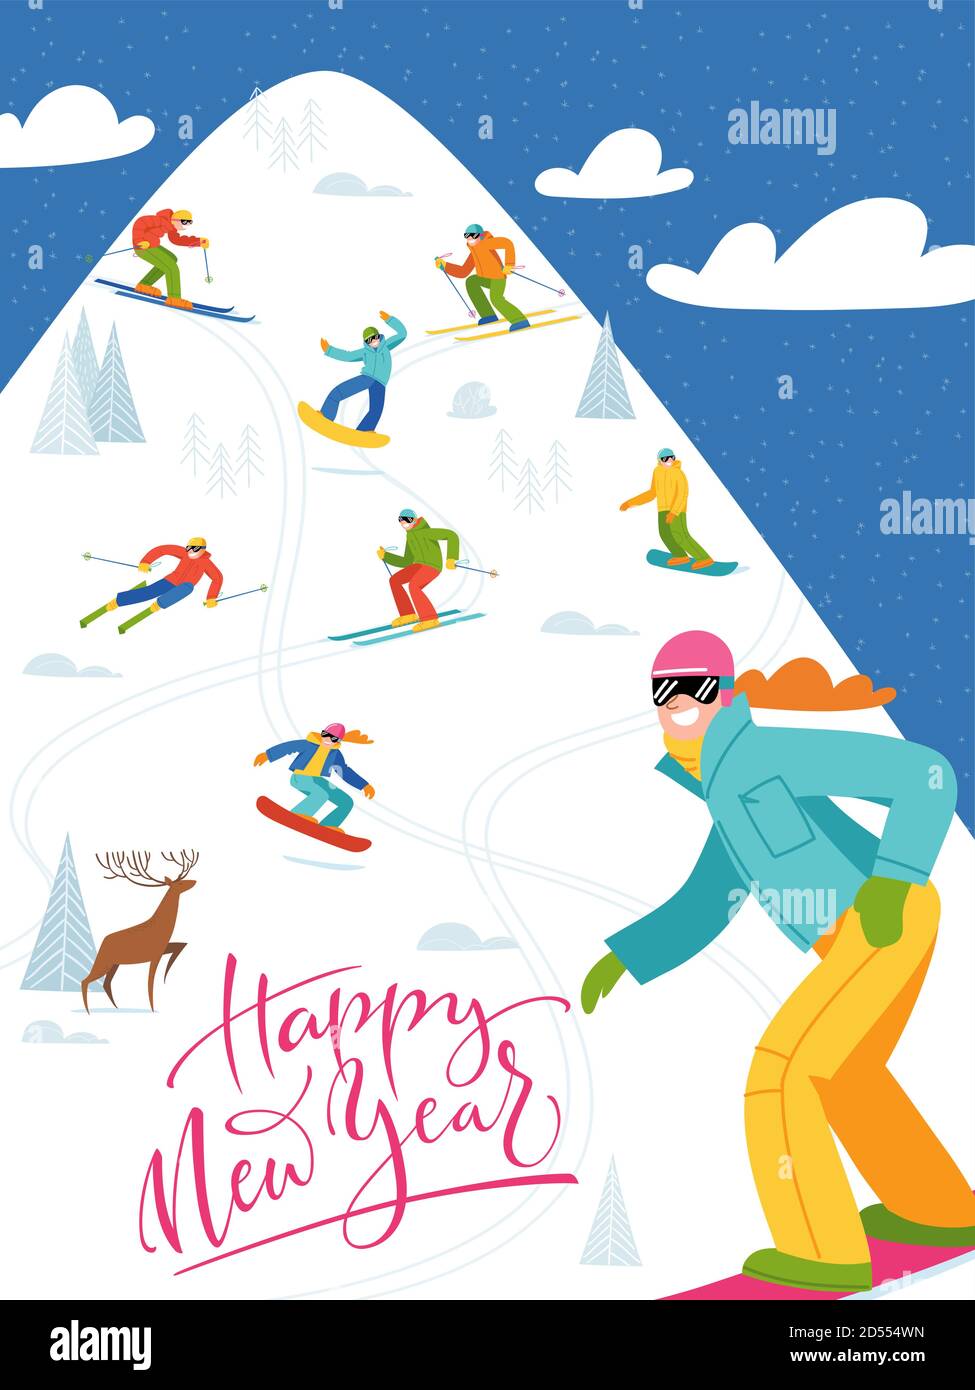 Ski resort poster with people doing winter sports. Stock Vector